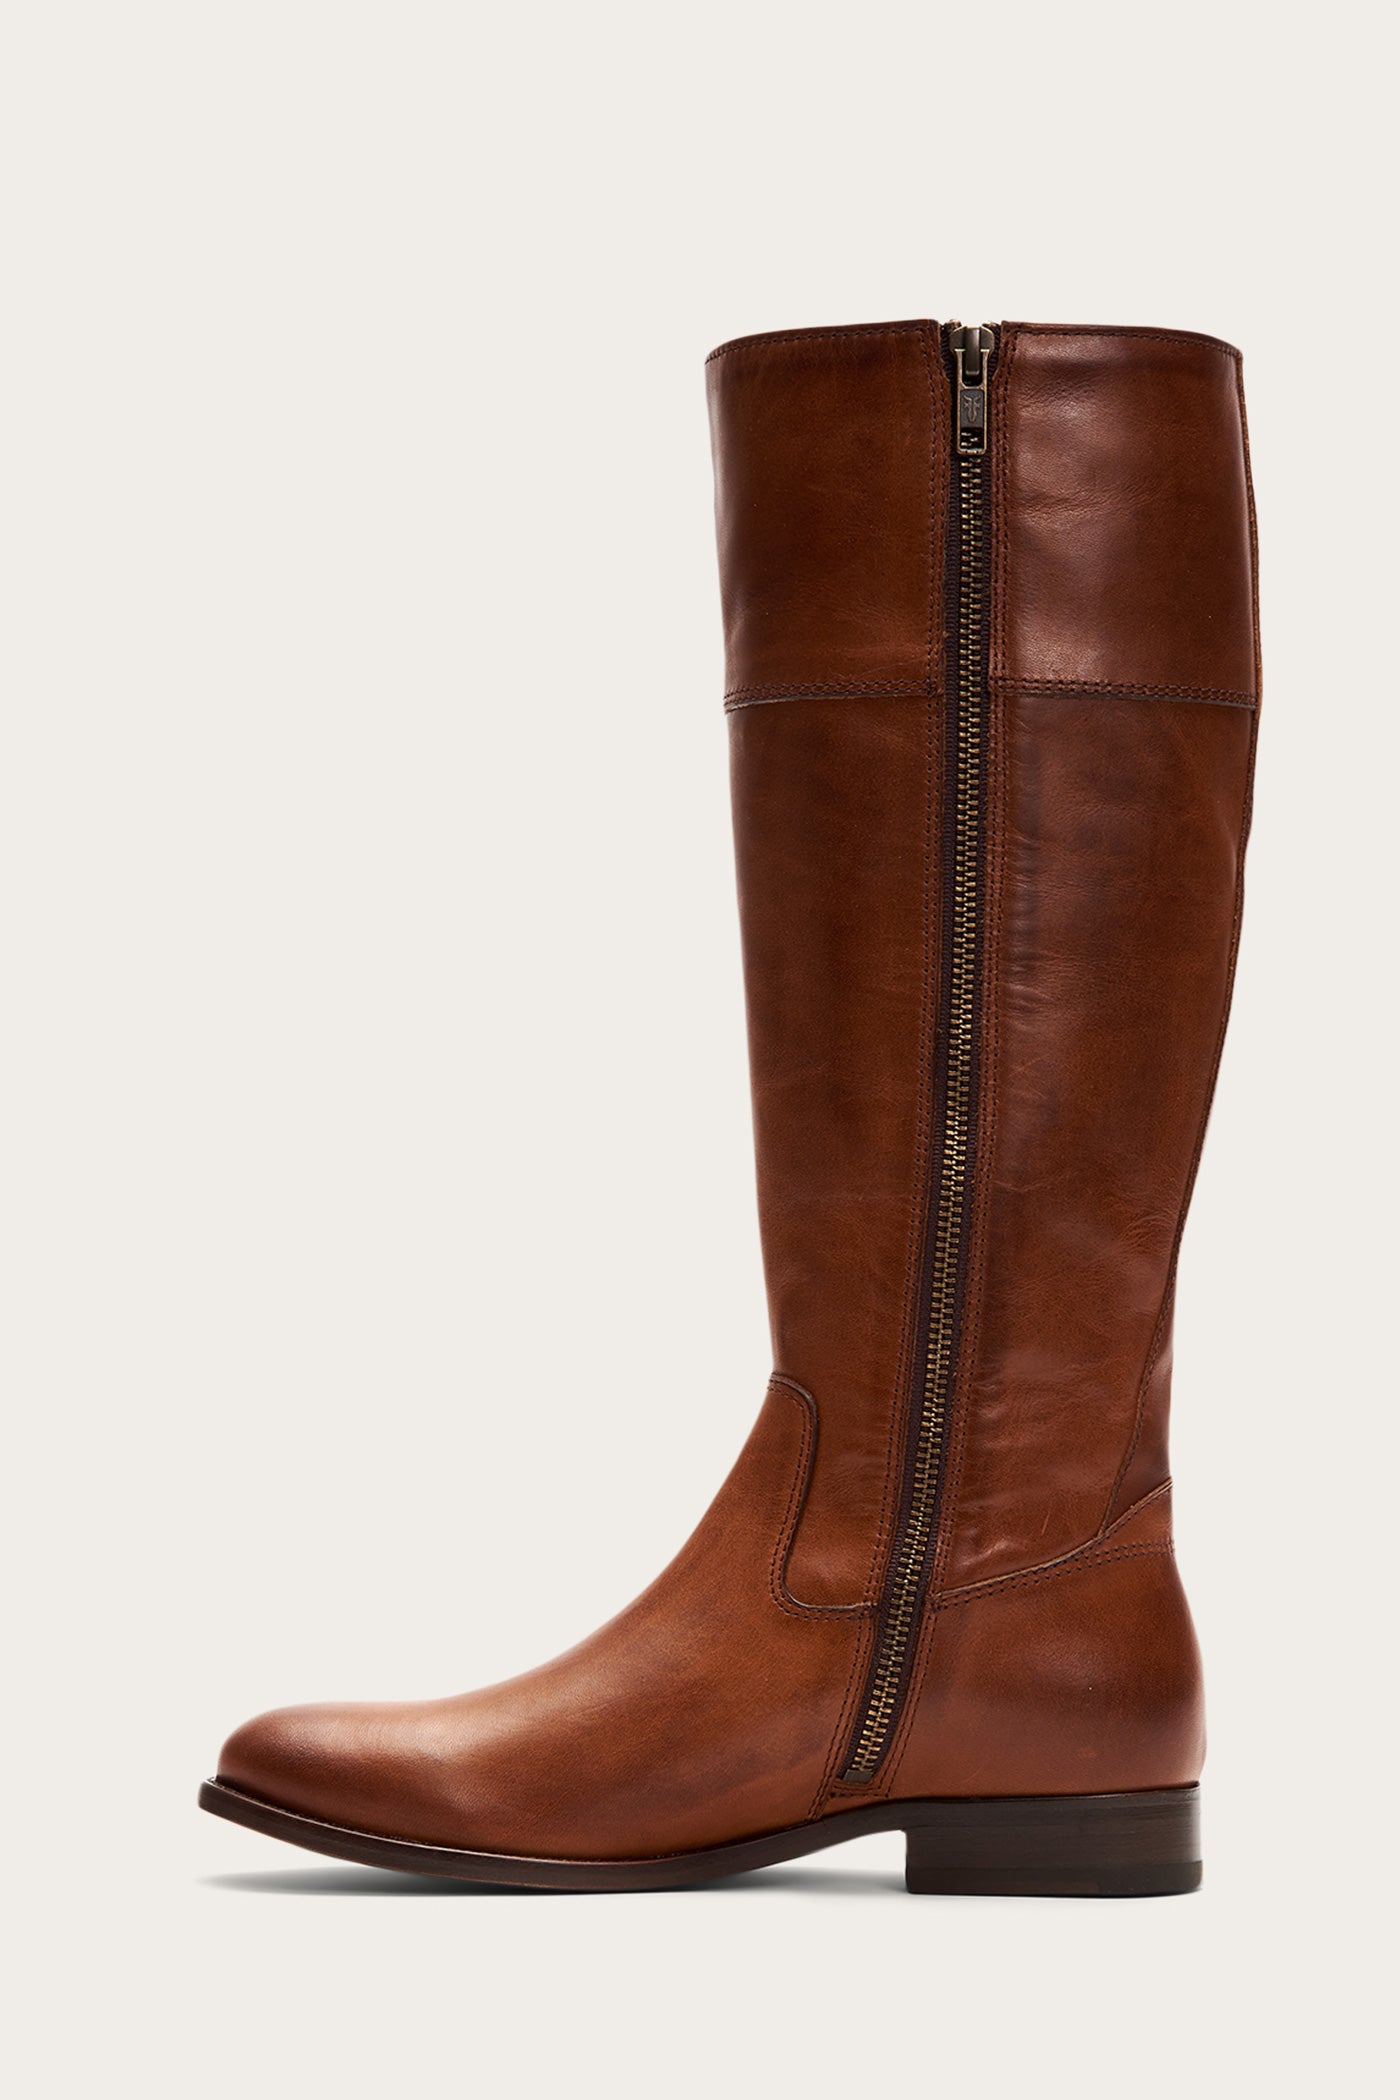 Melissa D Ring Tall Wide Calf | The Frye Company